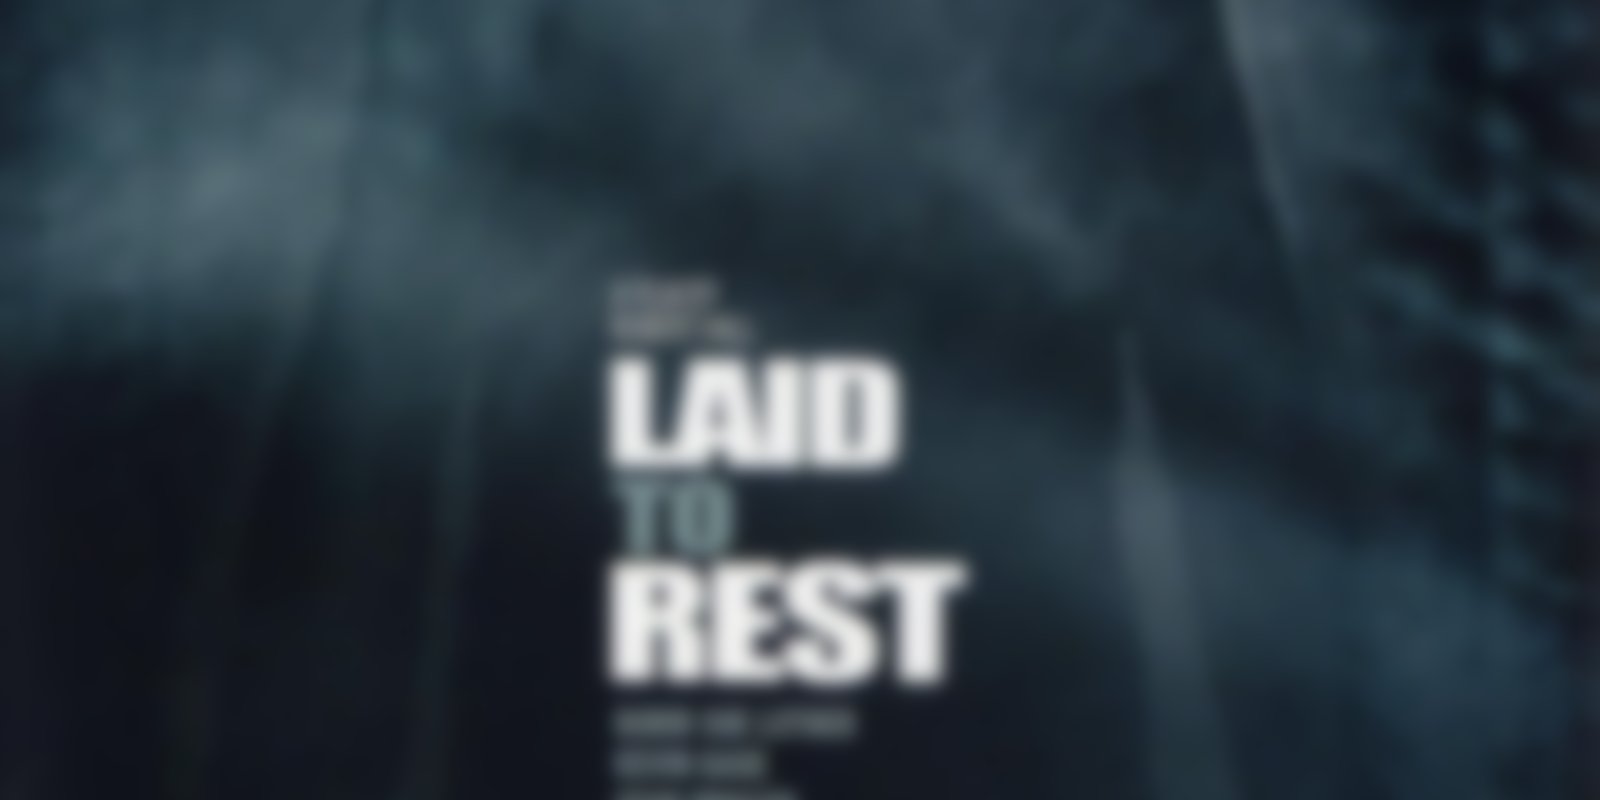 Laid to Rest